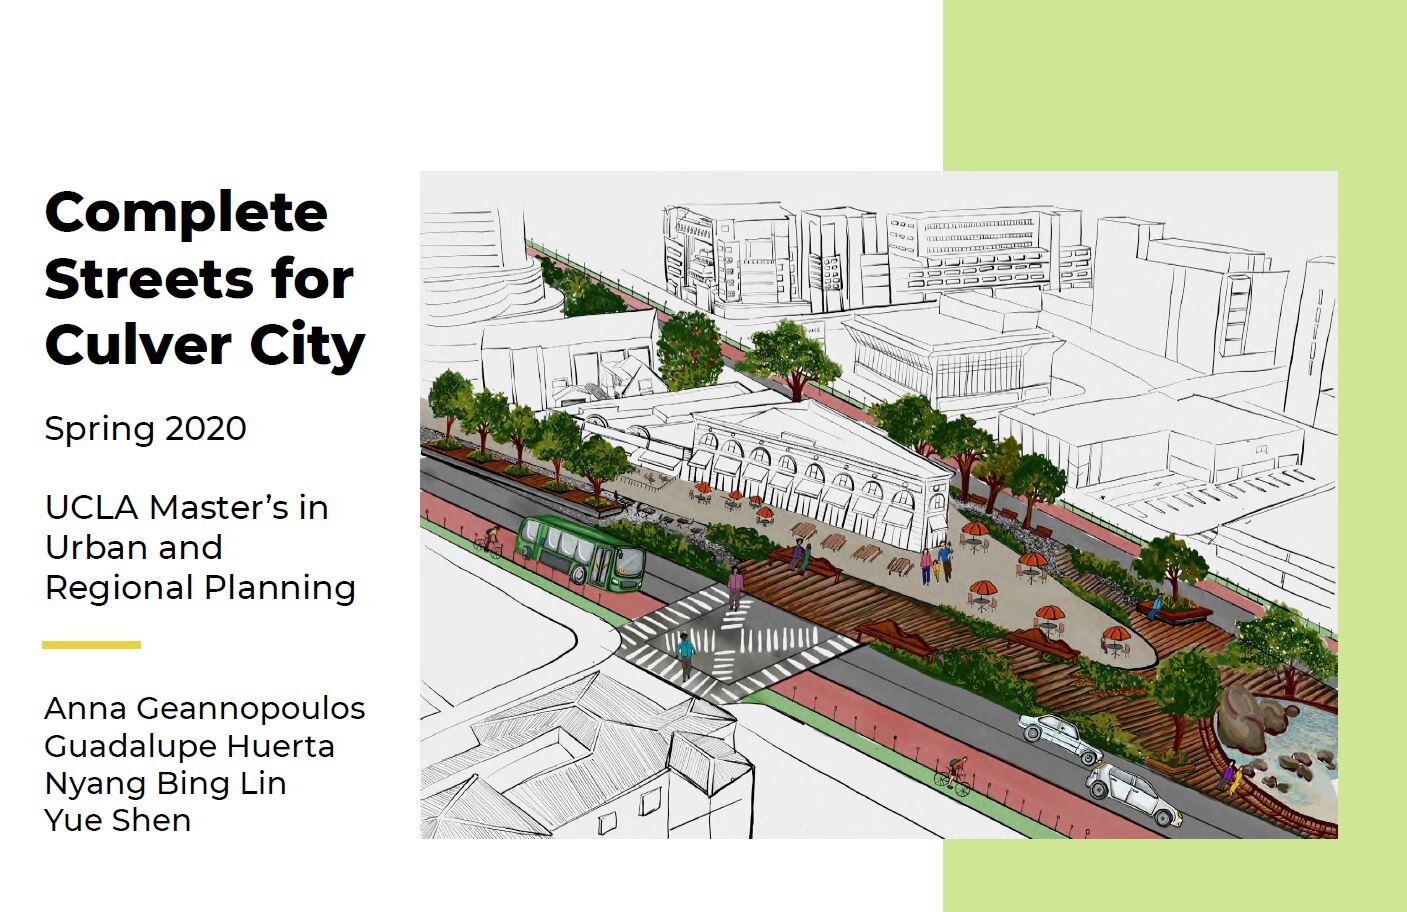 Complete Streets for Culver City